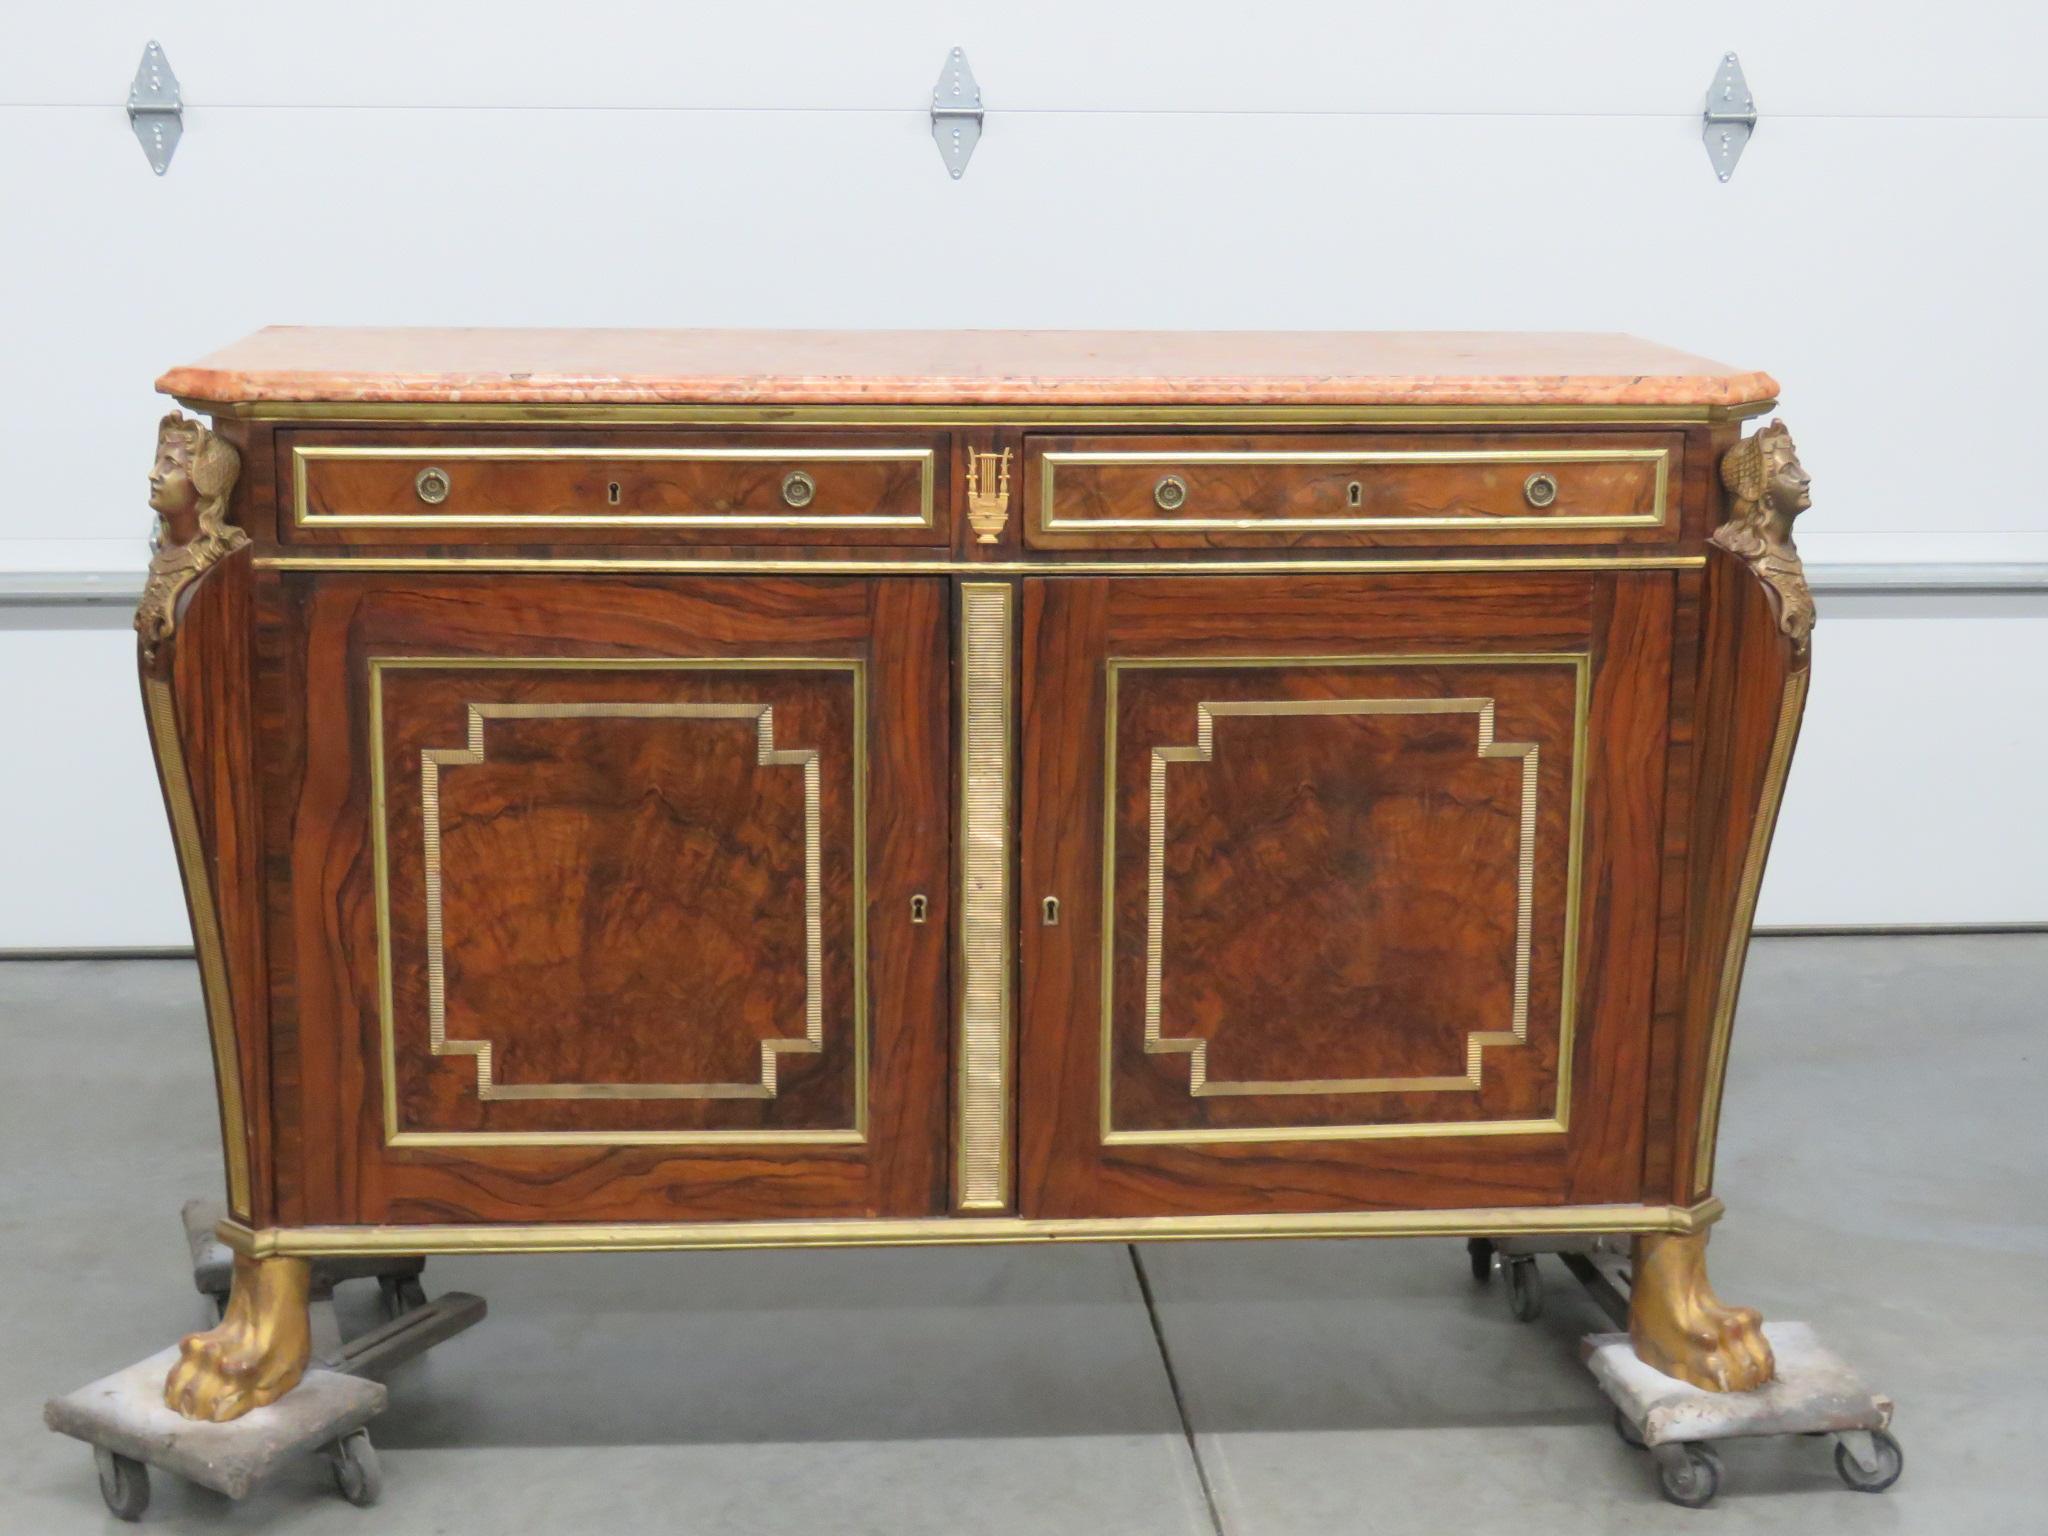 Russian Baltic marble-top bronze mounted commode with 2-drawers over 2-doors.